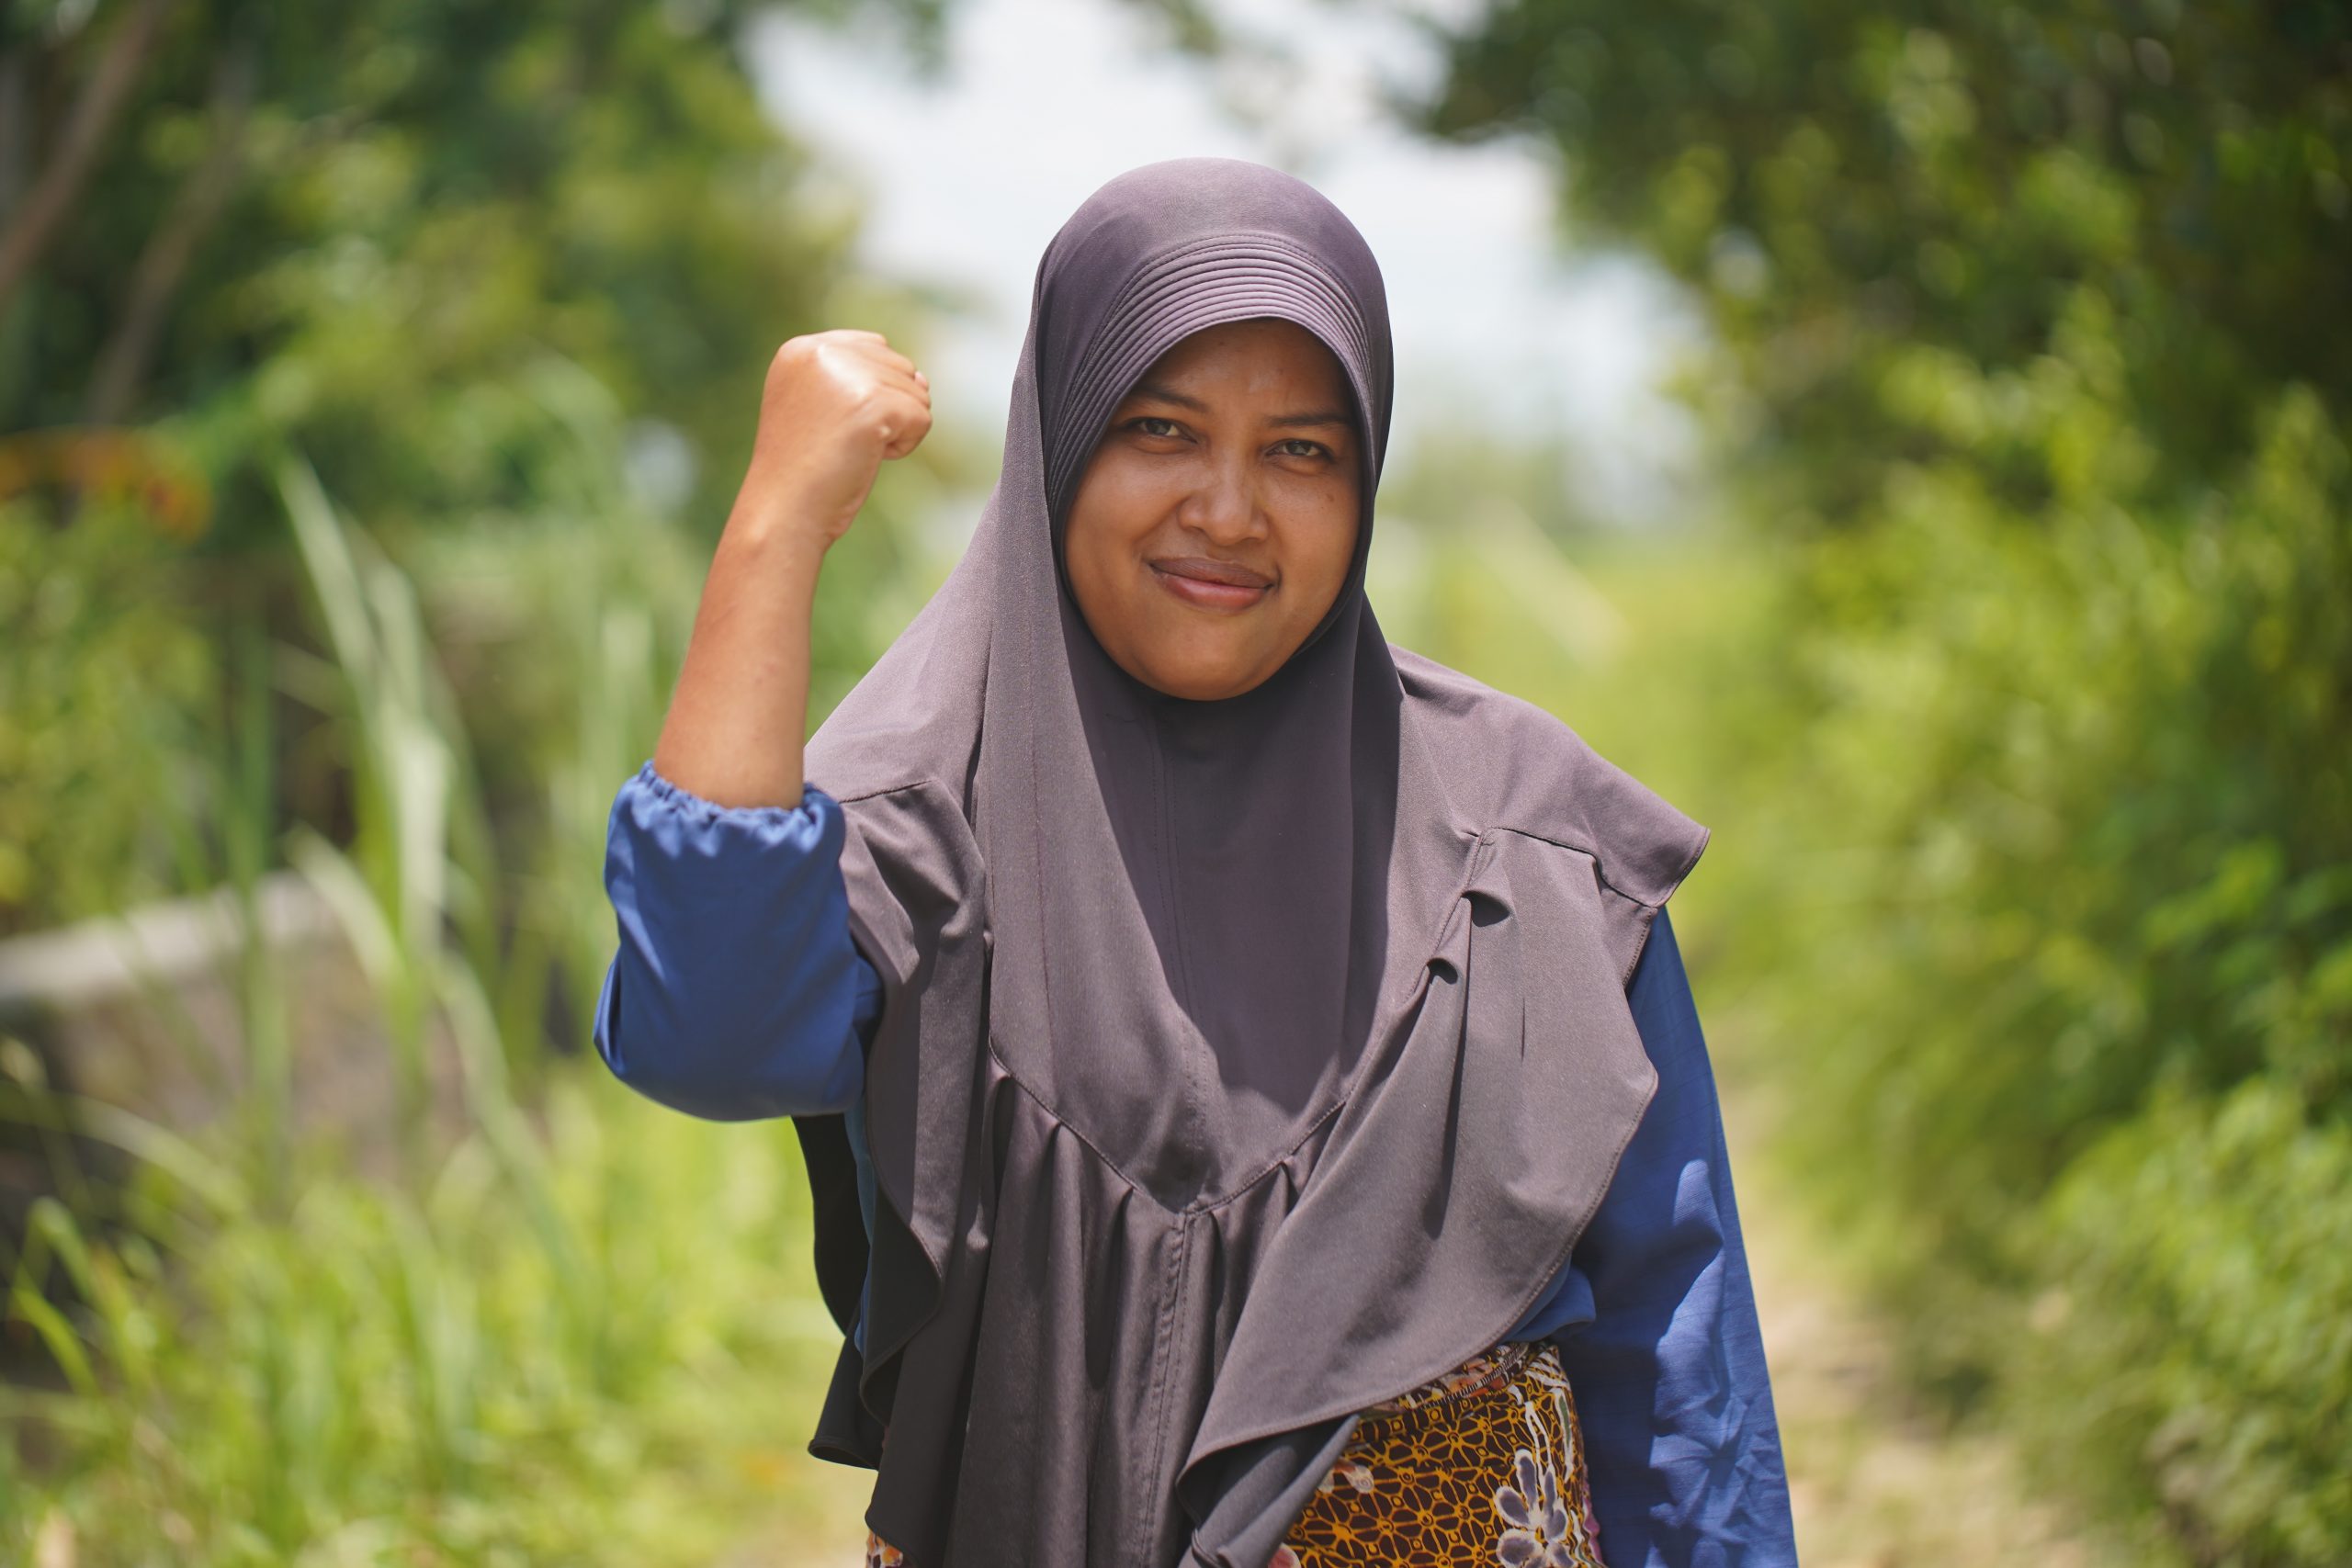 Yuli is a Himpunan Wanita Disabilitas Indonesia (HWDI, Indonesian Women with disability Association) leader, and states that women with disabilities often face GBV and many dont have any idea on how to report the assault. She originally joined Oxfam partner Adara initiatives for its incentives, but started participating in more workshops for the new people she could meet.